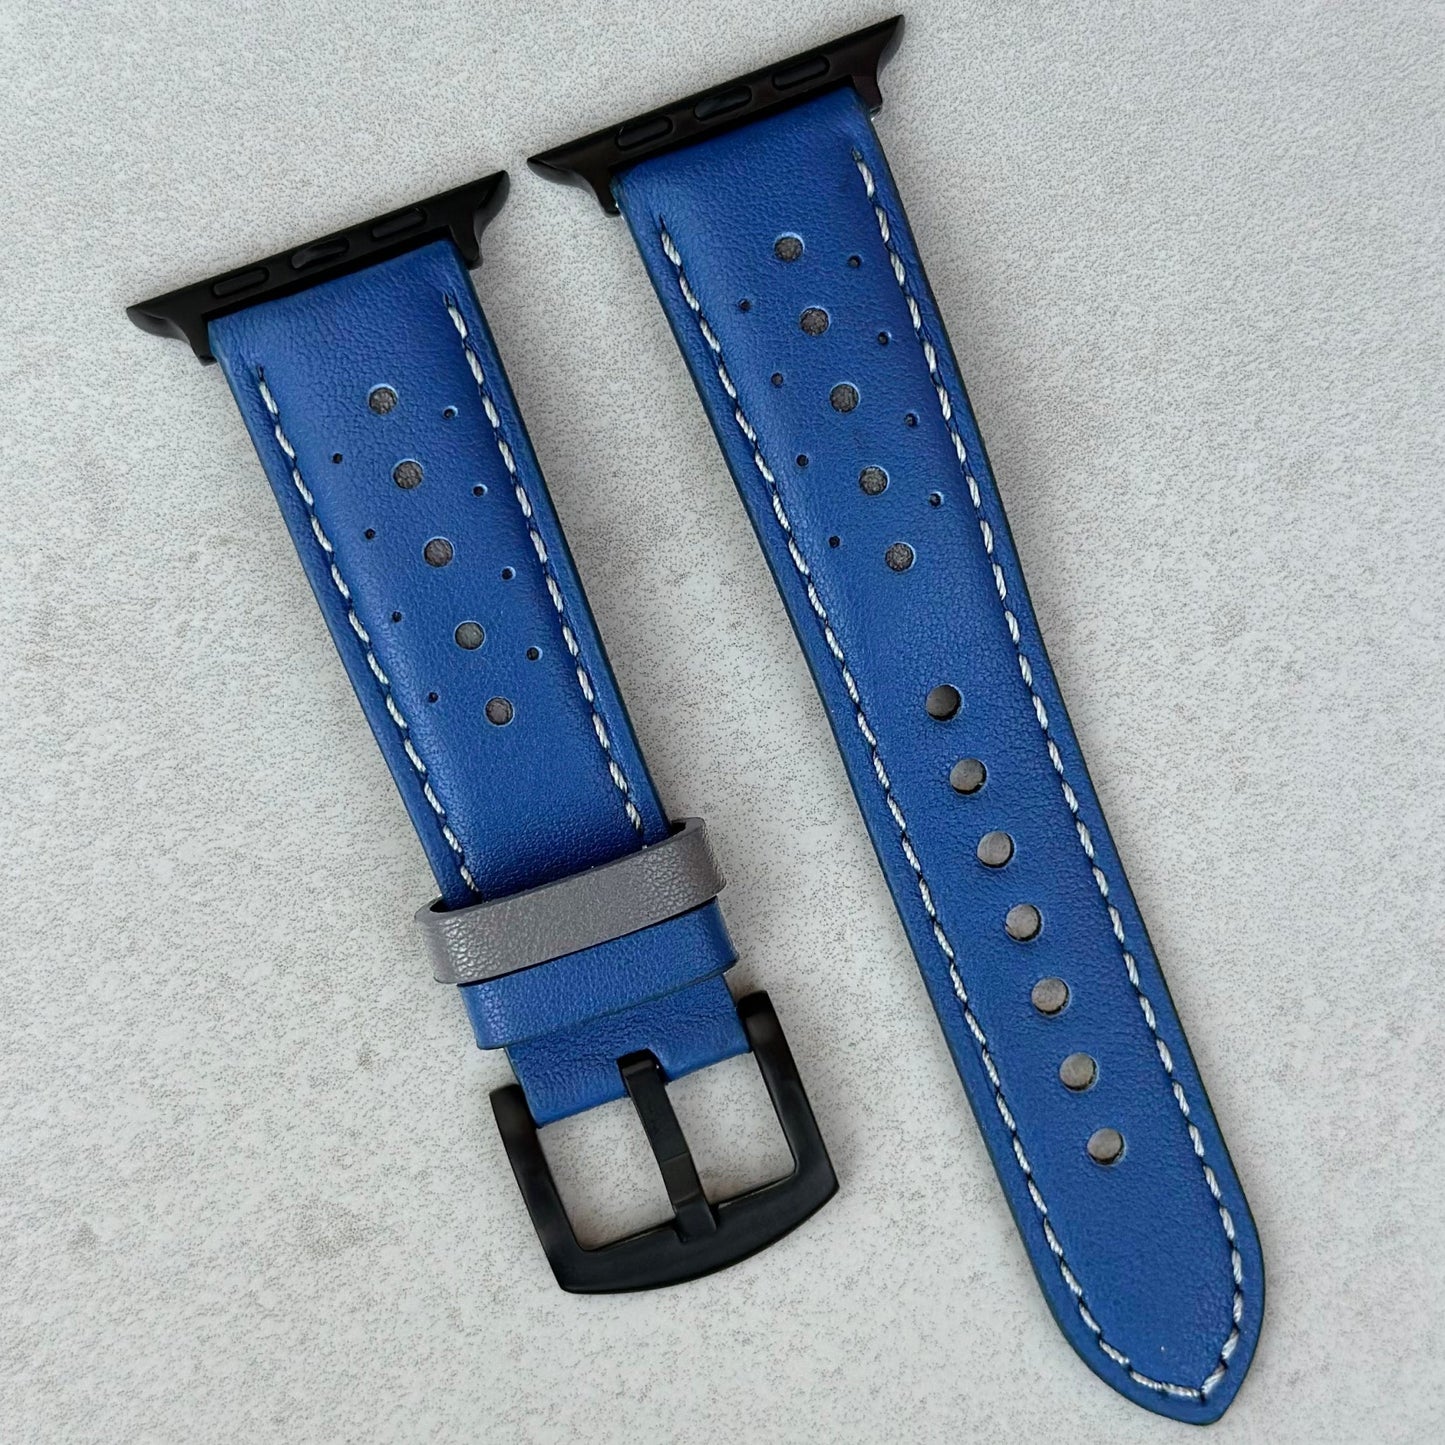 Le Mans blue and grey full grain leather racing apple watch strap. Black apple watch hardware.